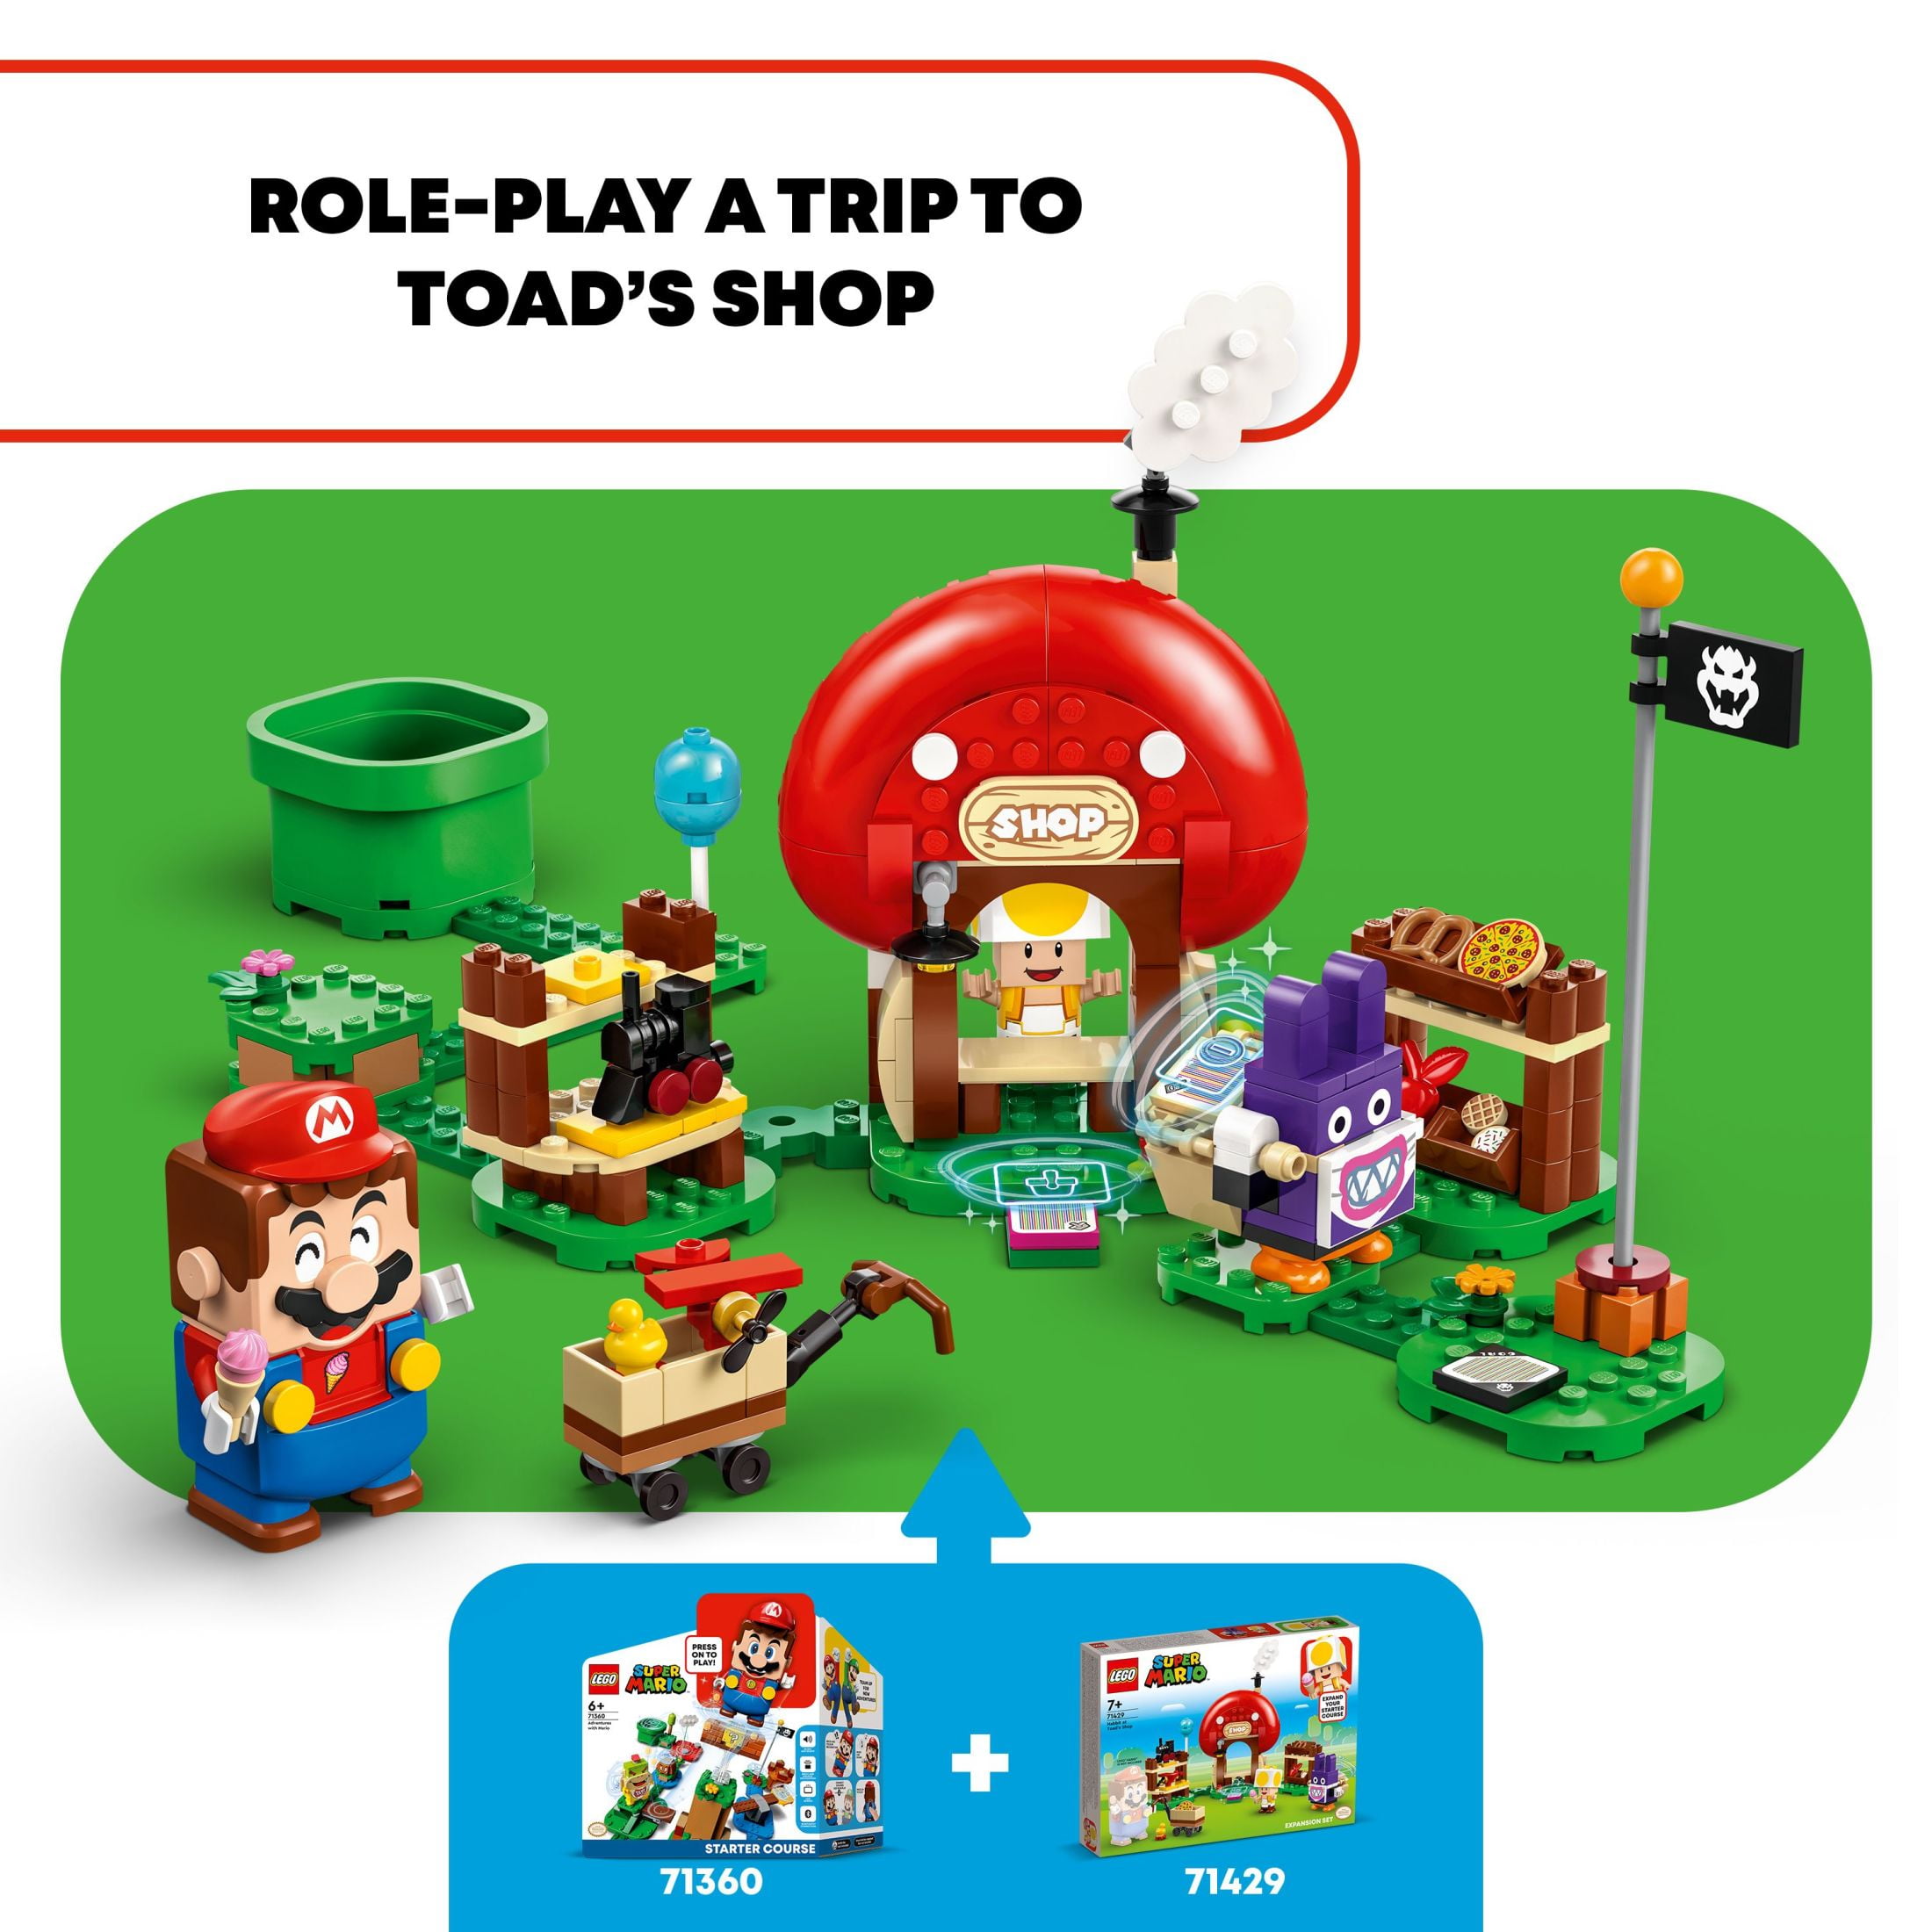 LEGO Adventures with Mario Starter Course (71360) – The Red